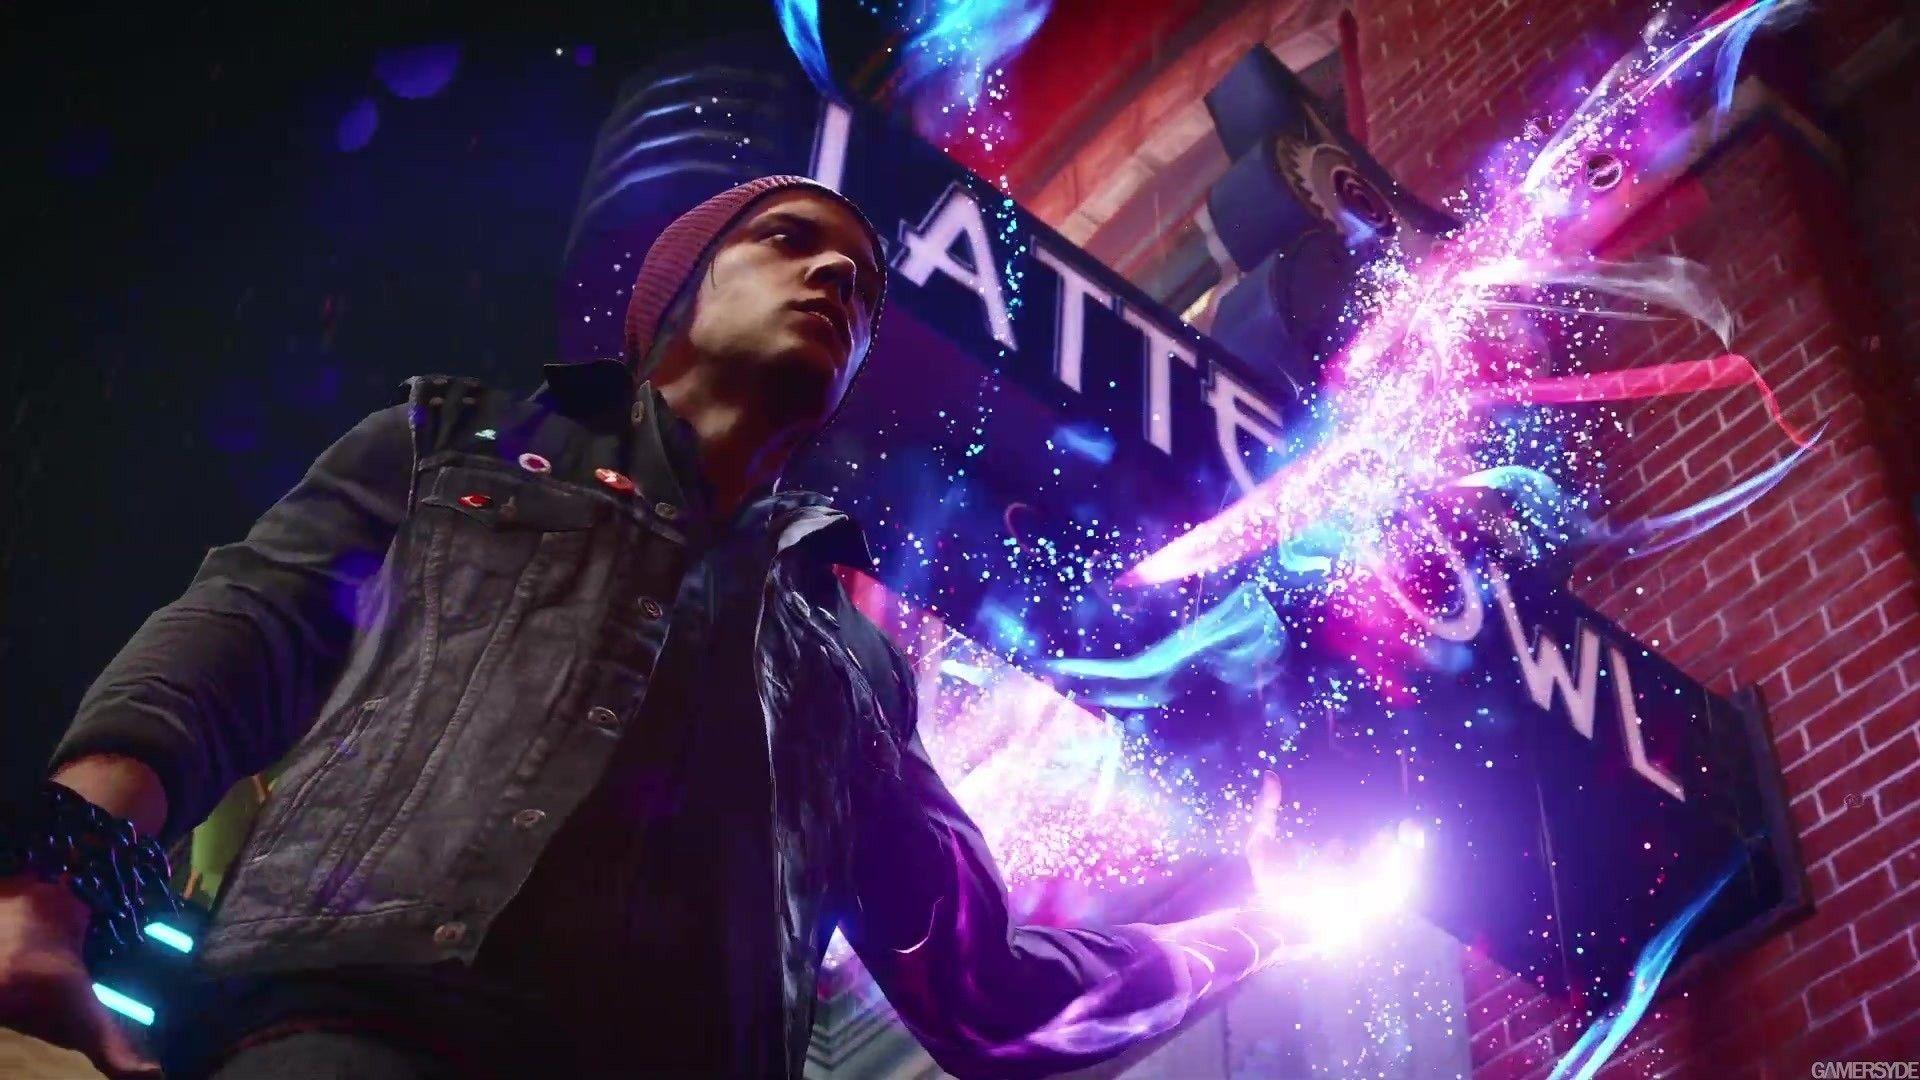 Wallpaper ID 481490  Video Game inFAMOUS Second Son Phone Wallpaper   720x1280 free download